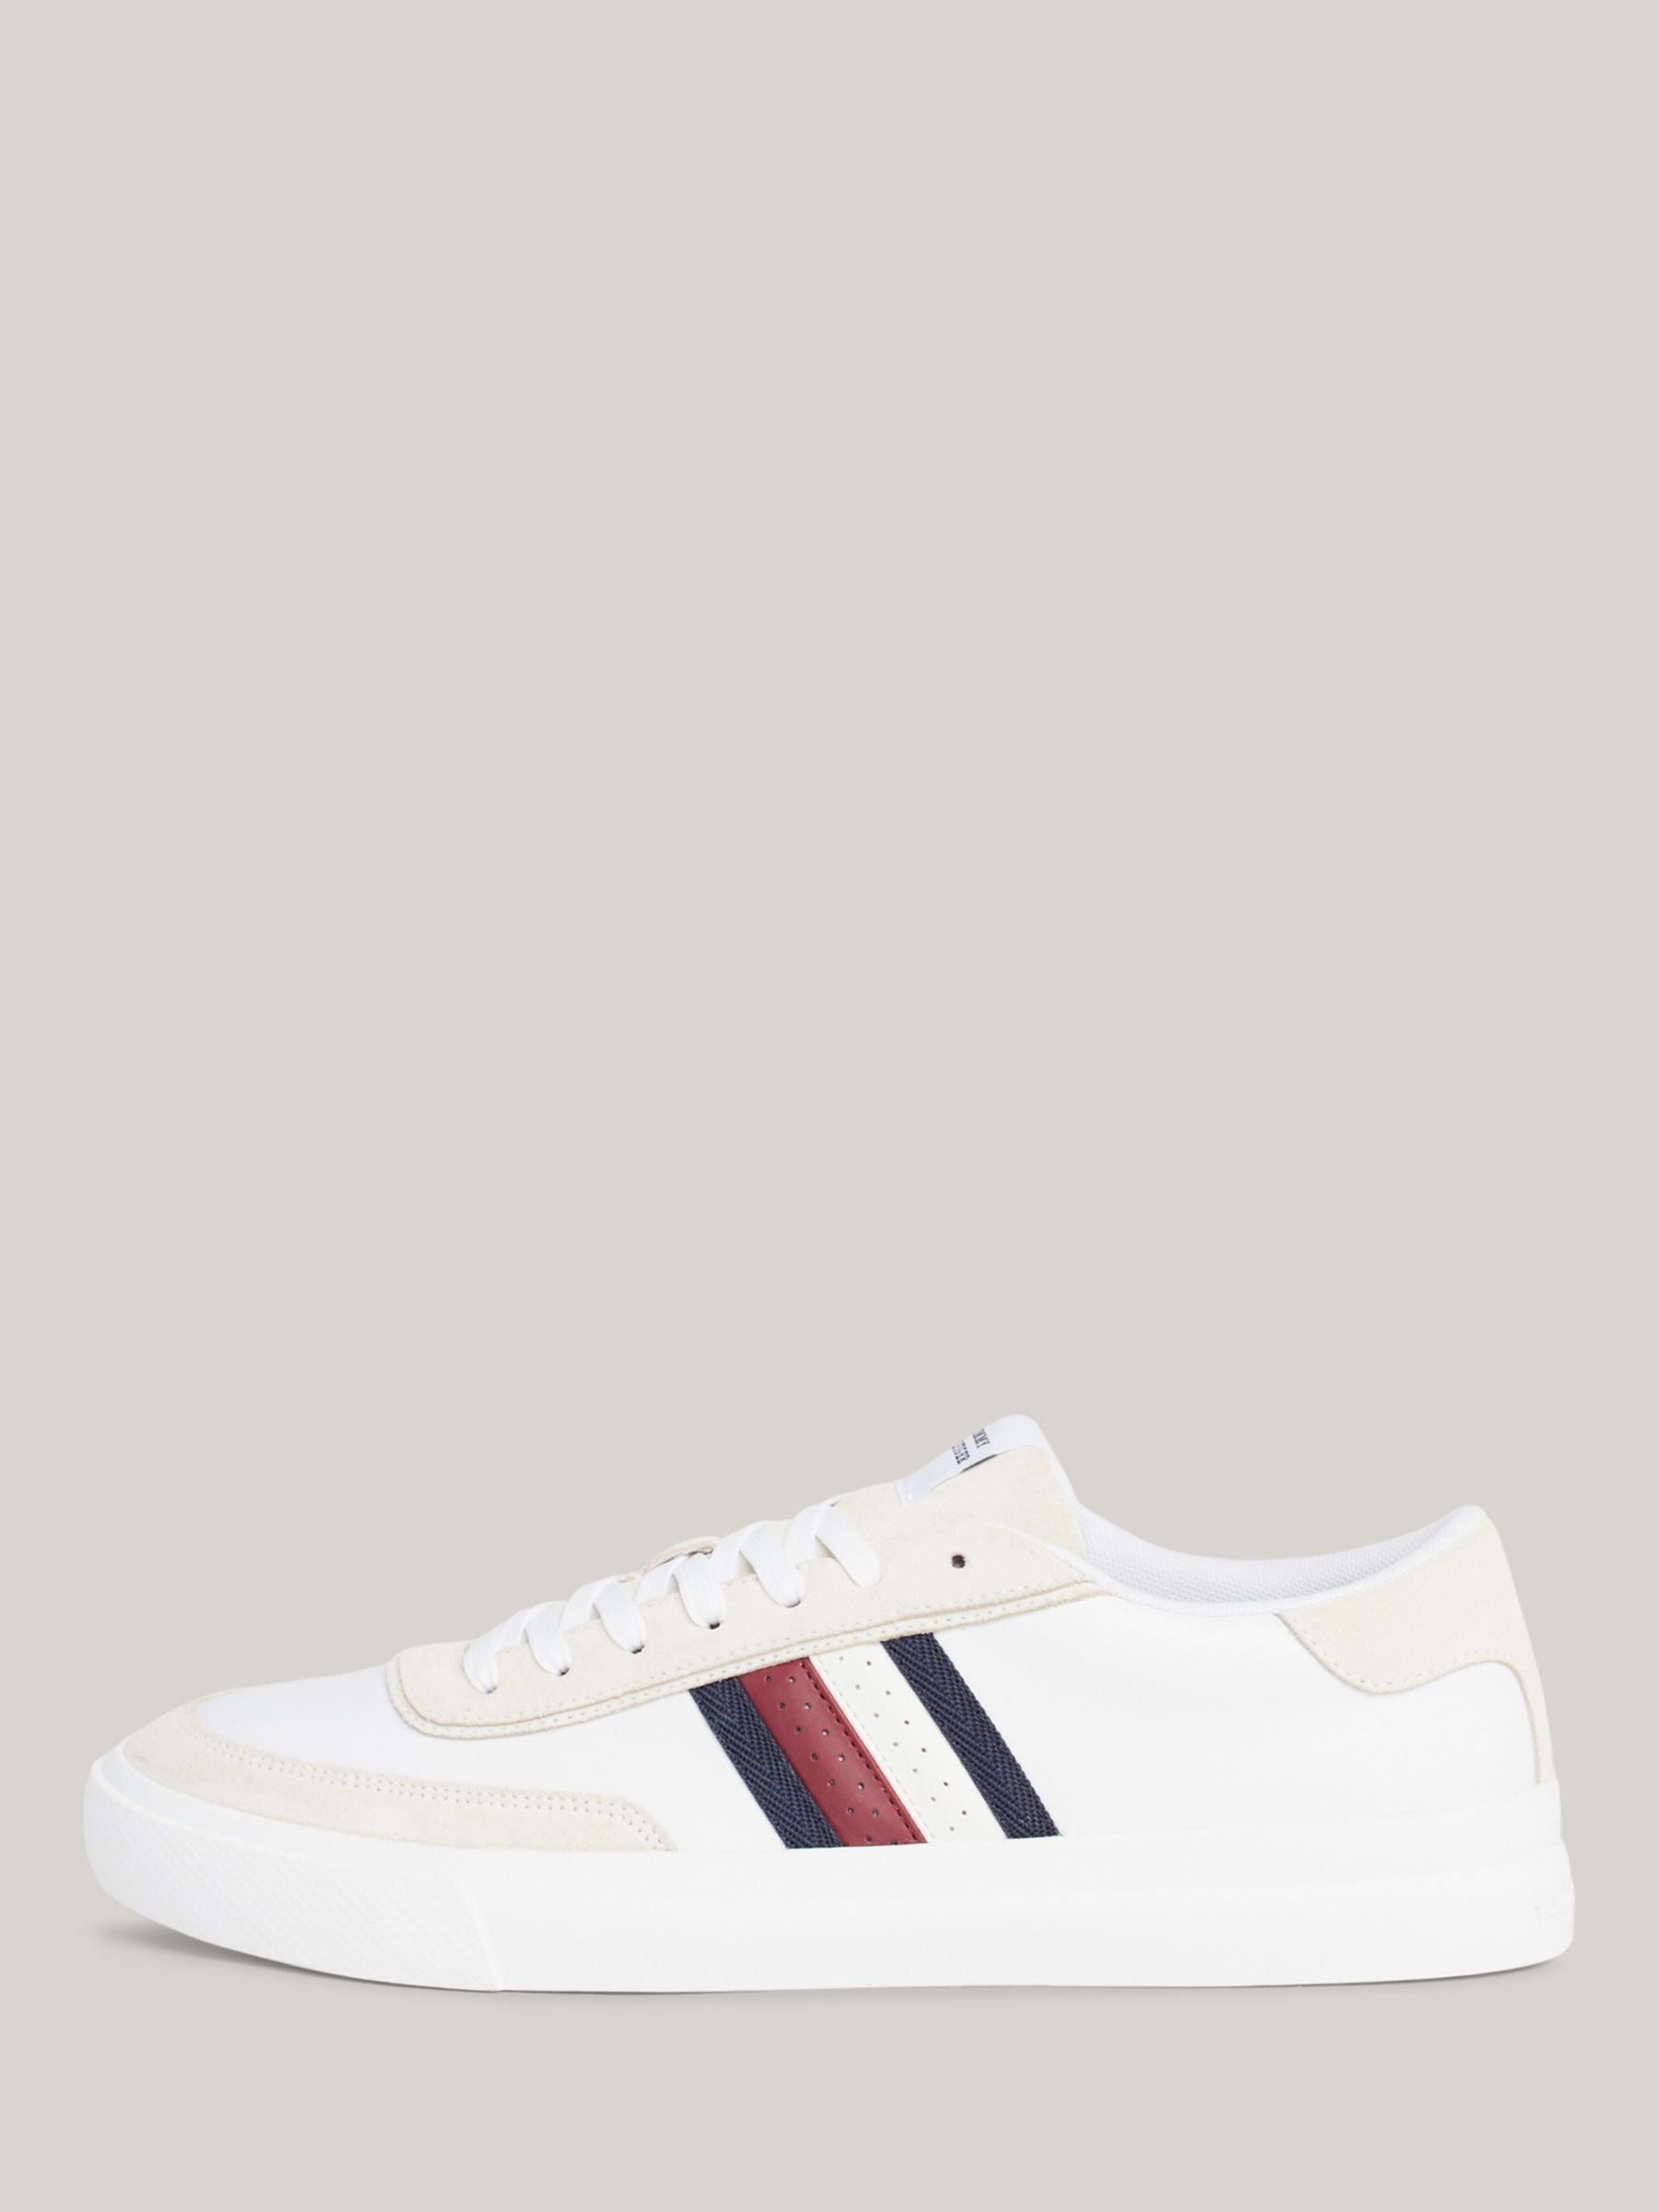 Buy Tommy Hilfiger Cupsole Leather Low Top Trainers Online at johnlewis.com